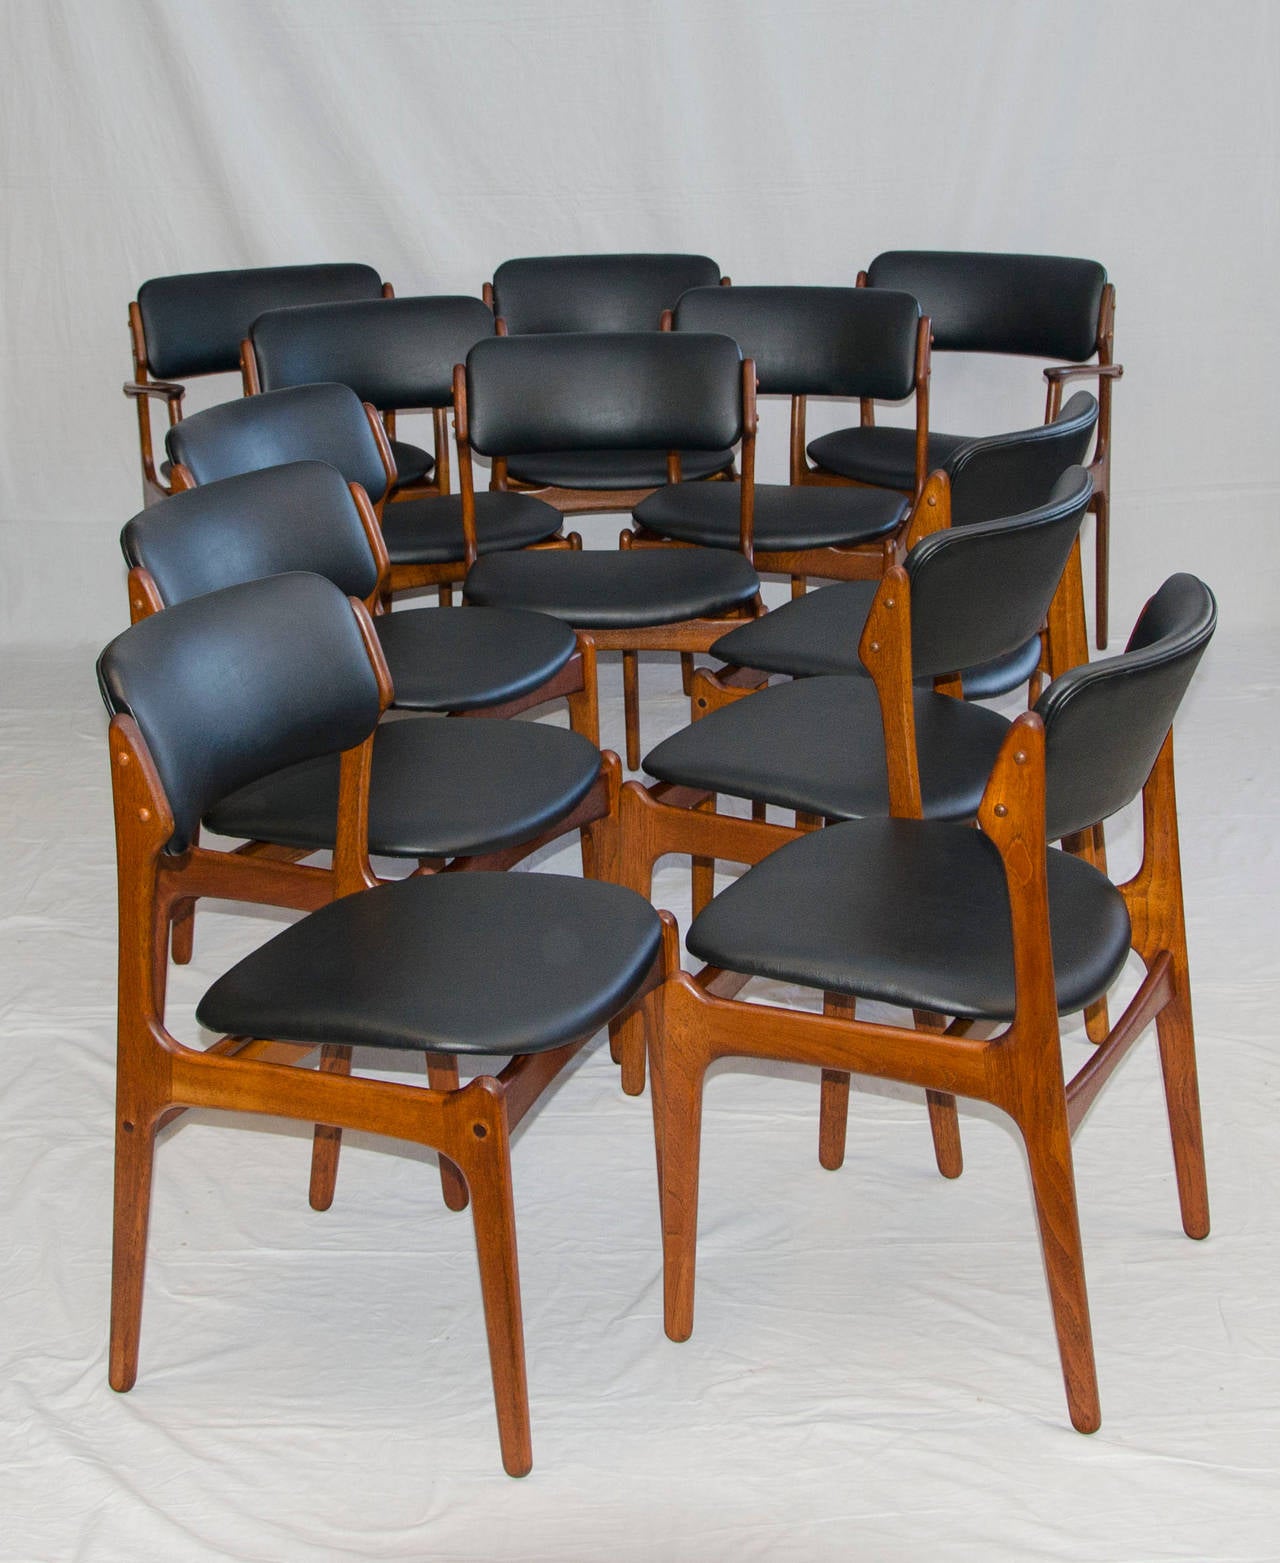 Large set of stylish Danish teak dining chairs designed by Erik Buck for O. D. Mobler.A favorite chair for the comfort aspect, well designed and constructed.
Side chair dimensions are: 31